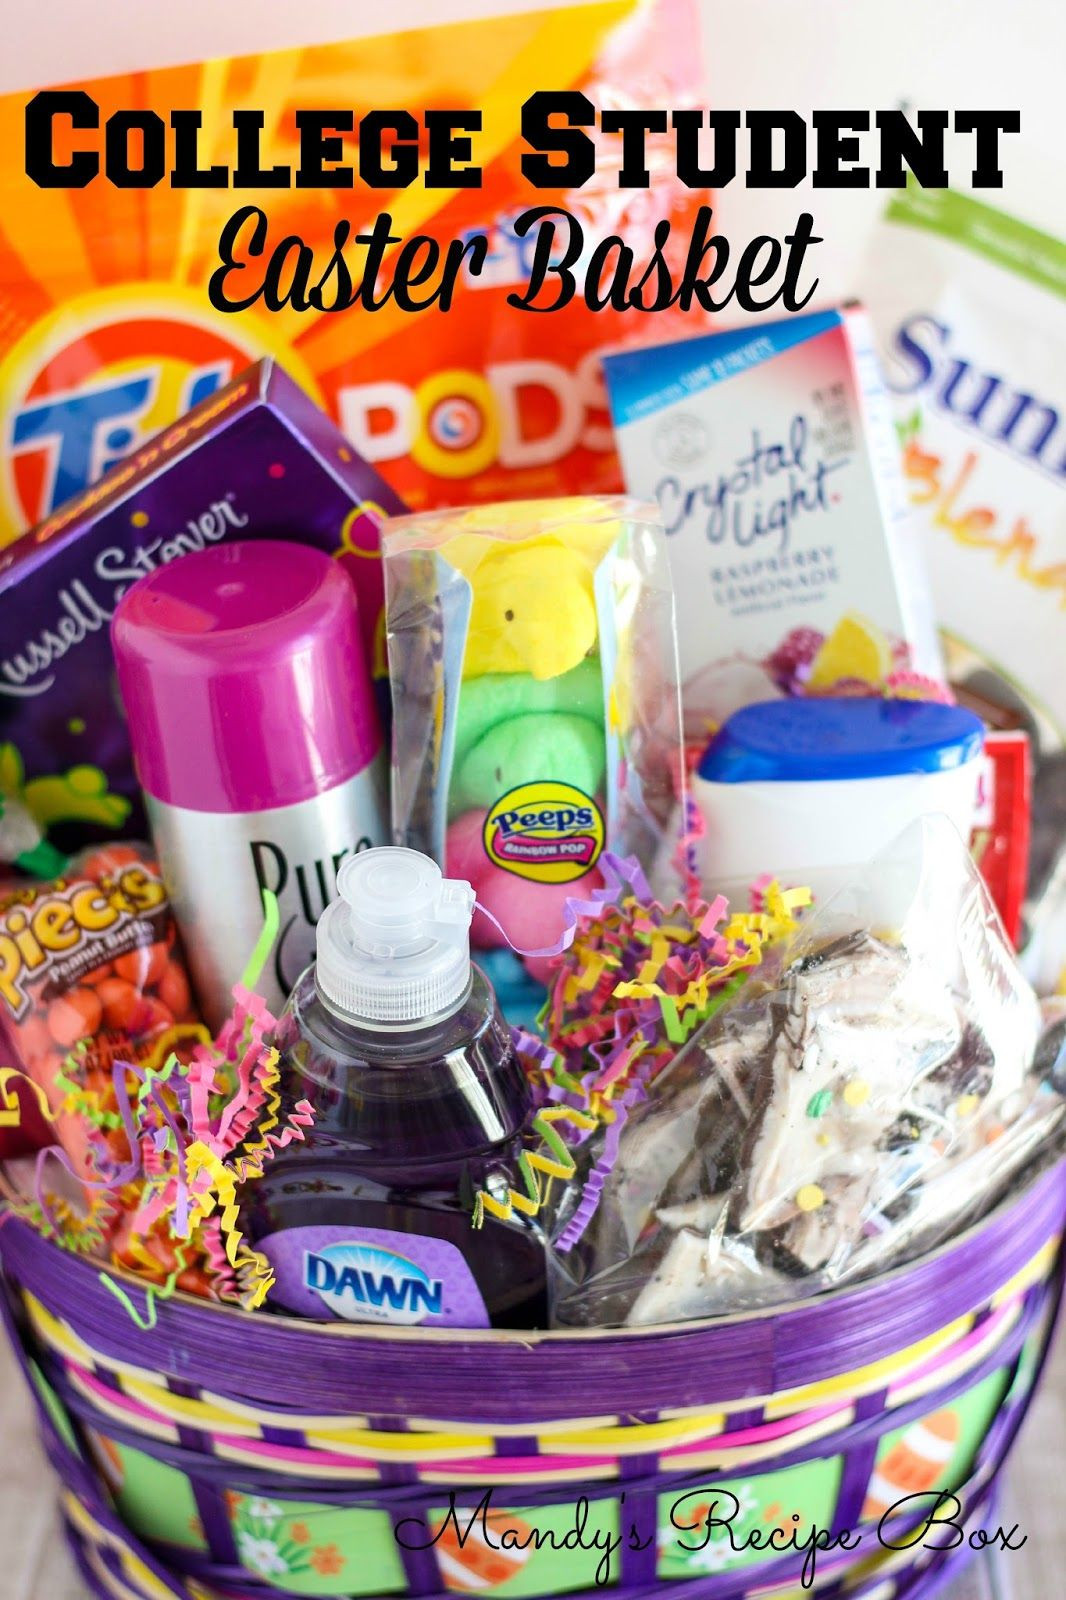 Gift Basket Ideas For College Students
 College Student Easter Basket With images